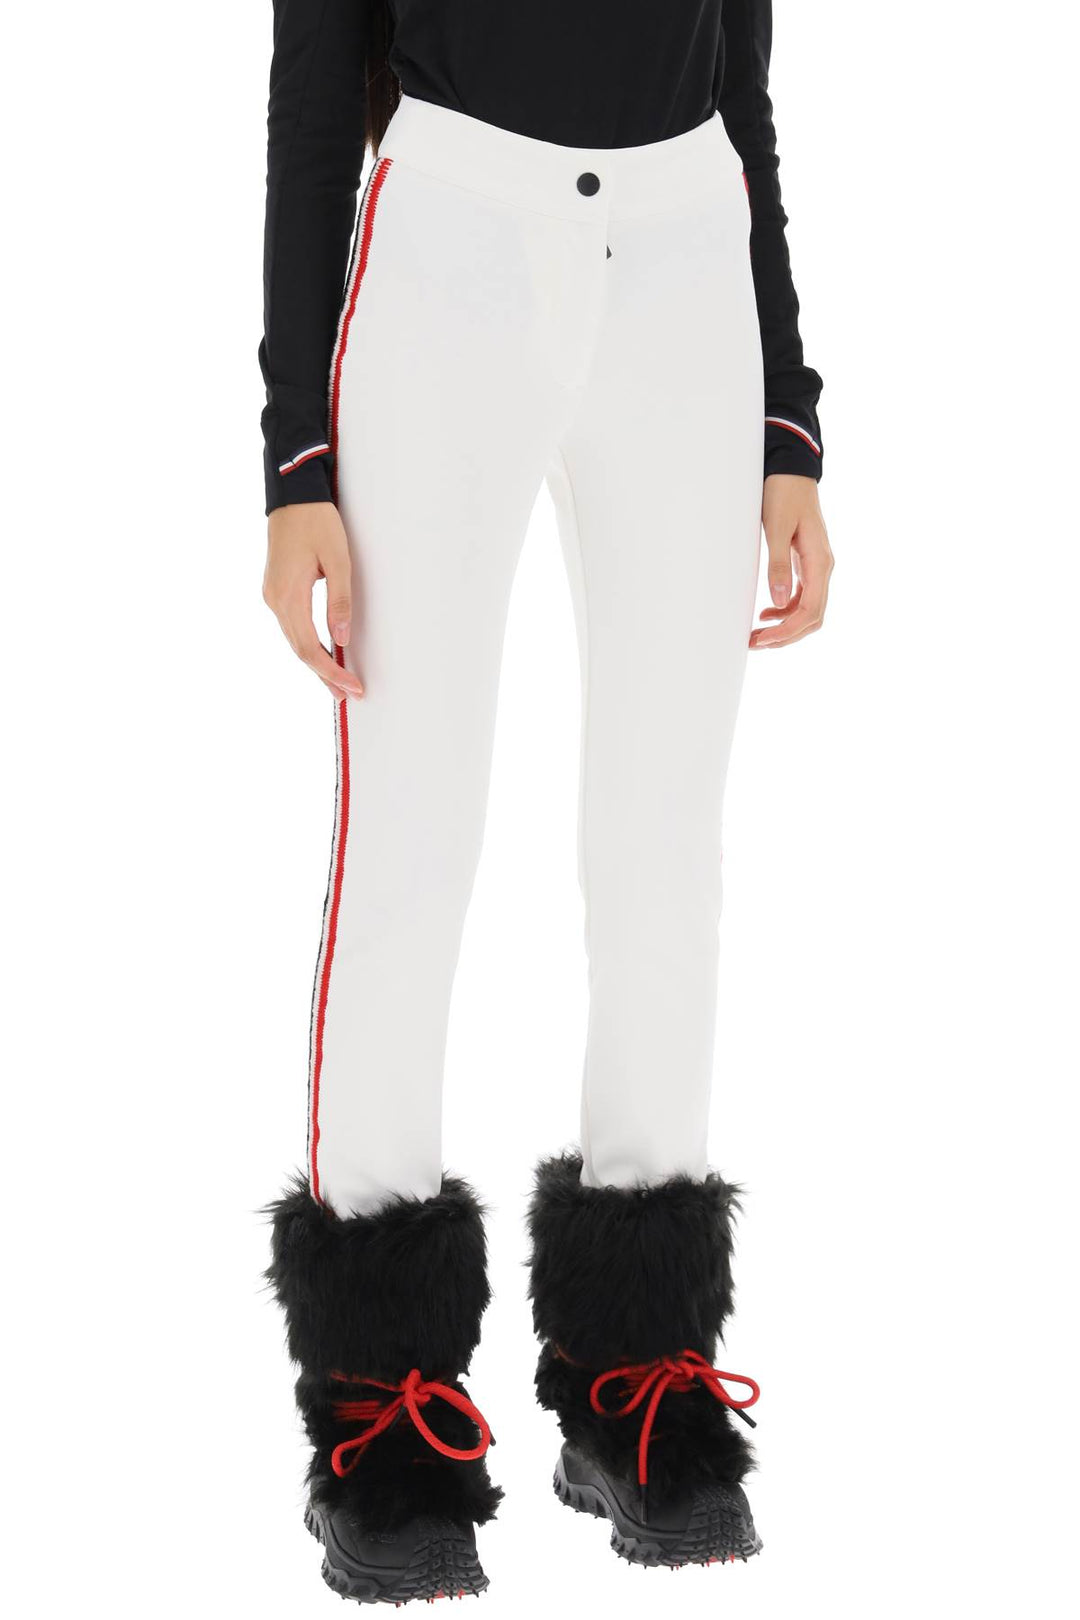 Moncler Grenoble Sporty Pants With Tricolor Bands   Bianco